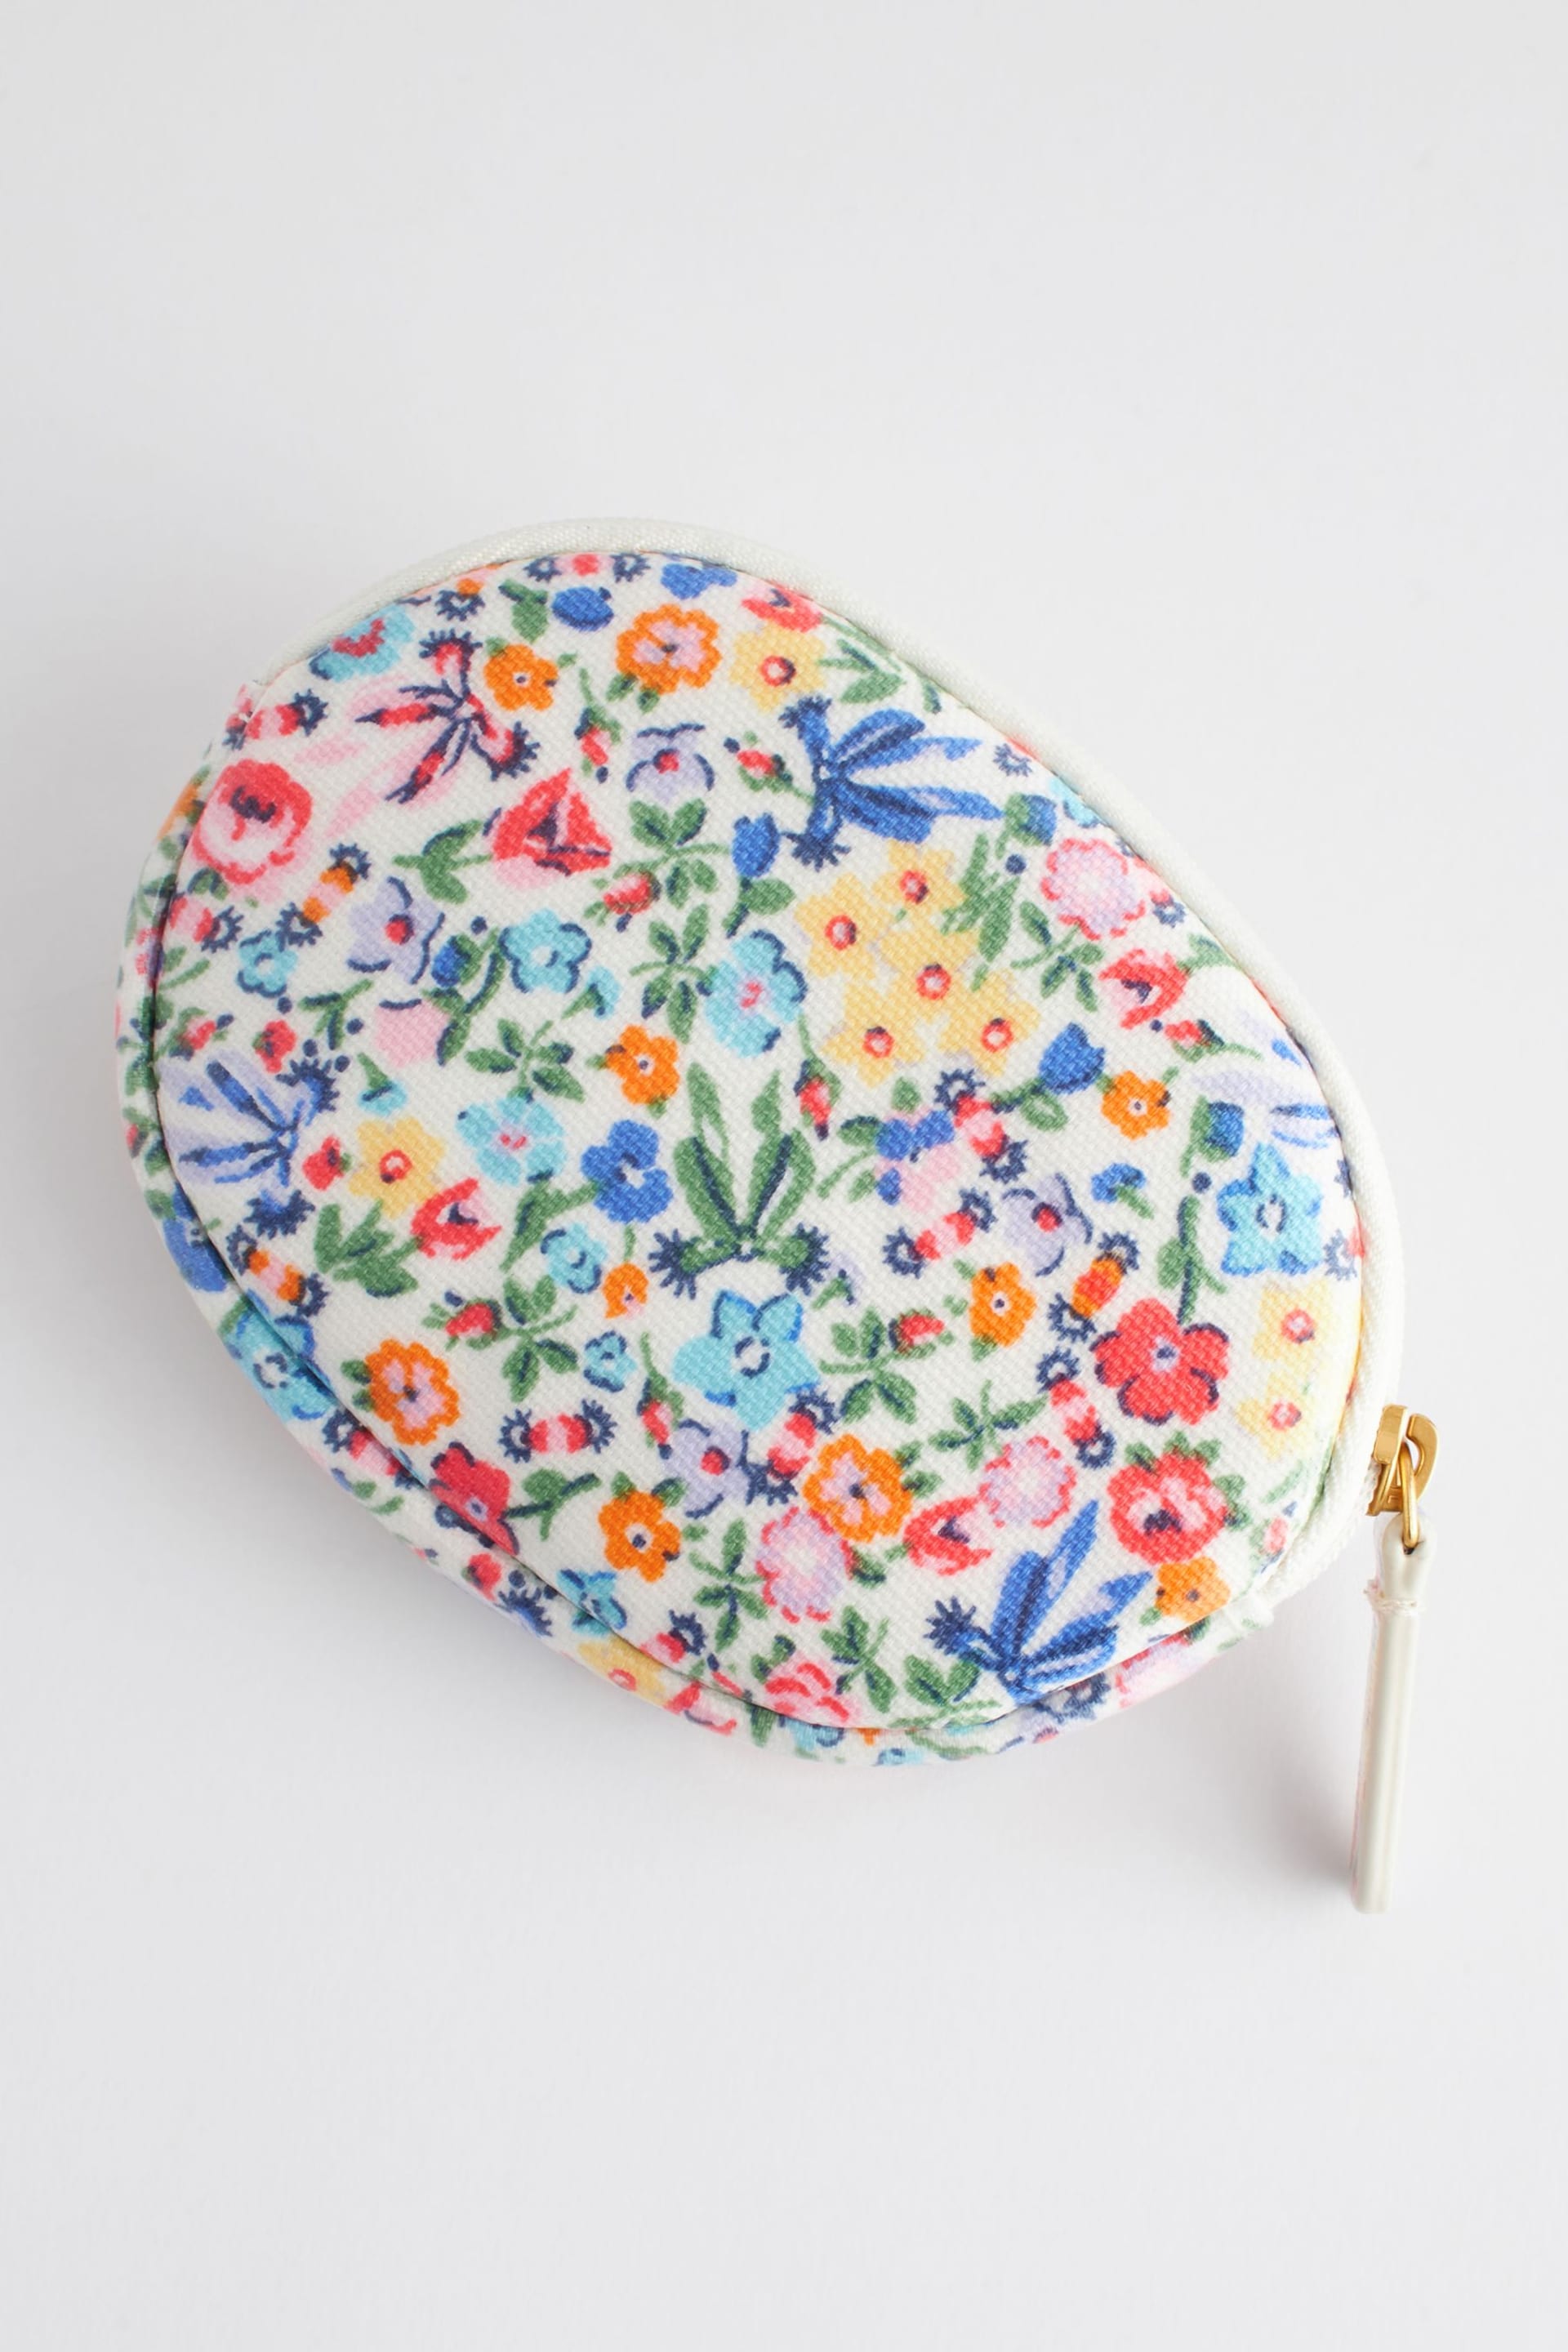 Cath Kidston Blue/Yellow Ditsy Floral Round Pocket Purse - Image 2 of 4